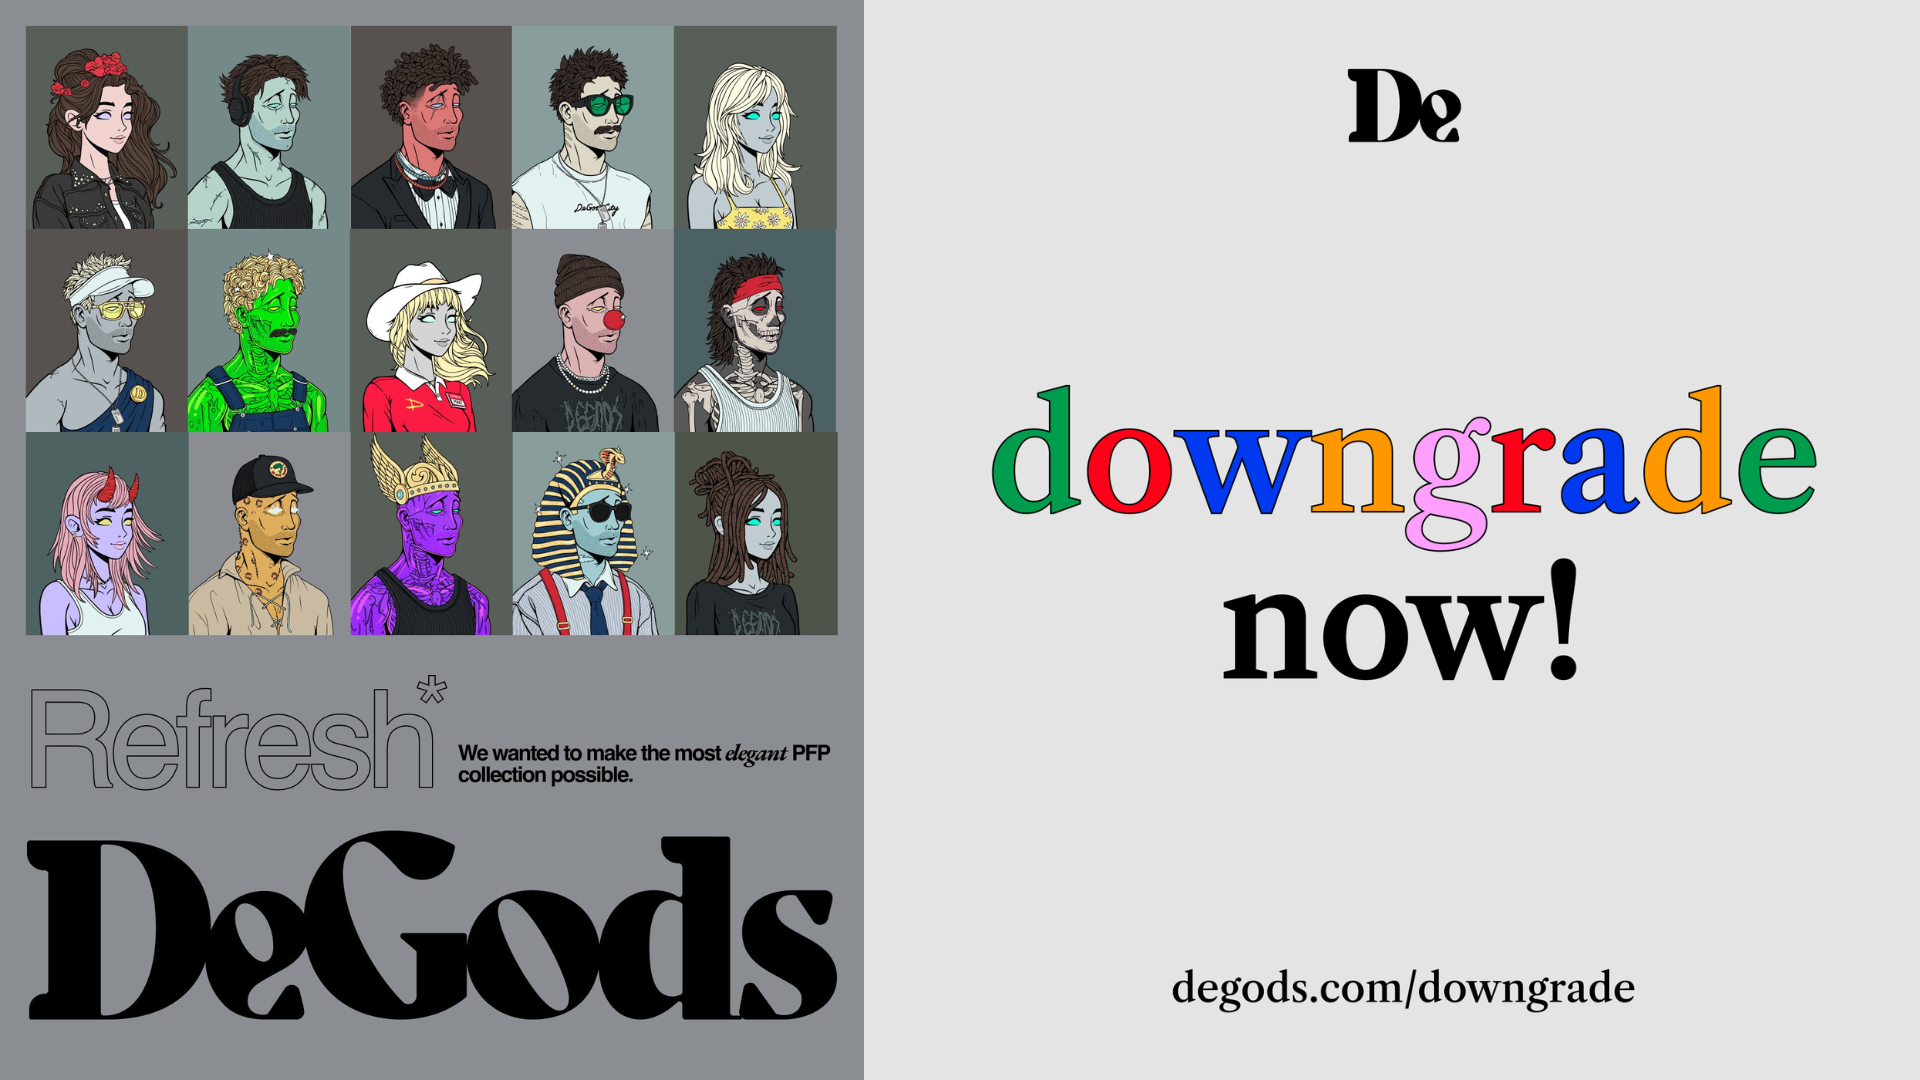 DeGods Season 3 poster with the "downgrade now" text